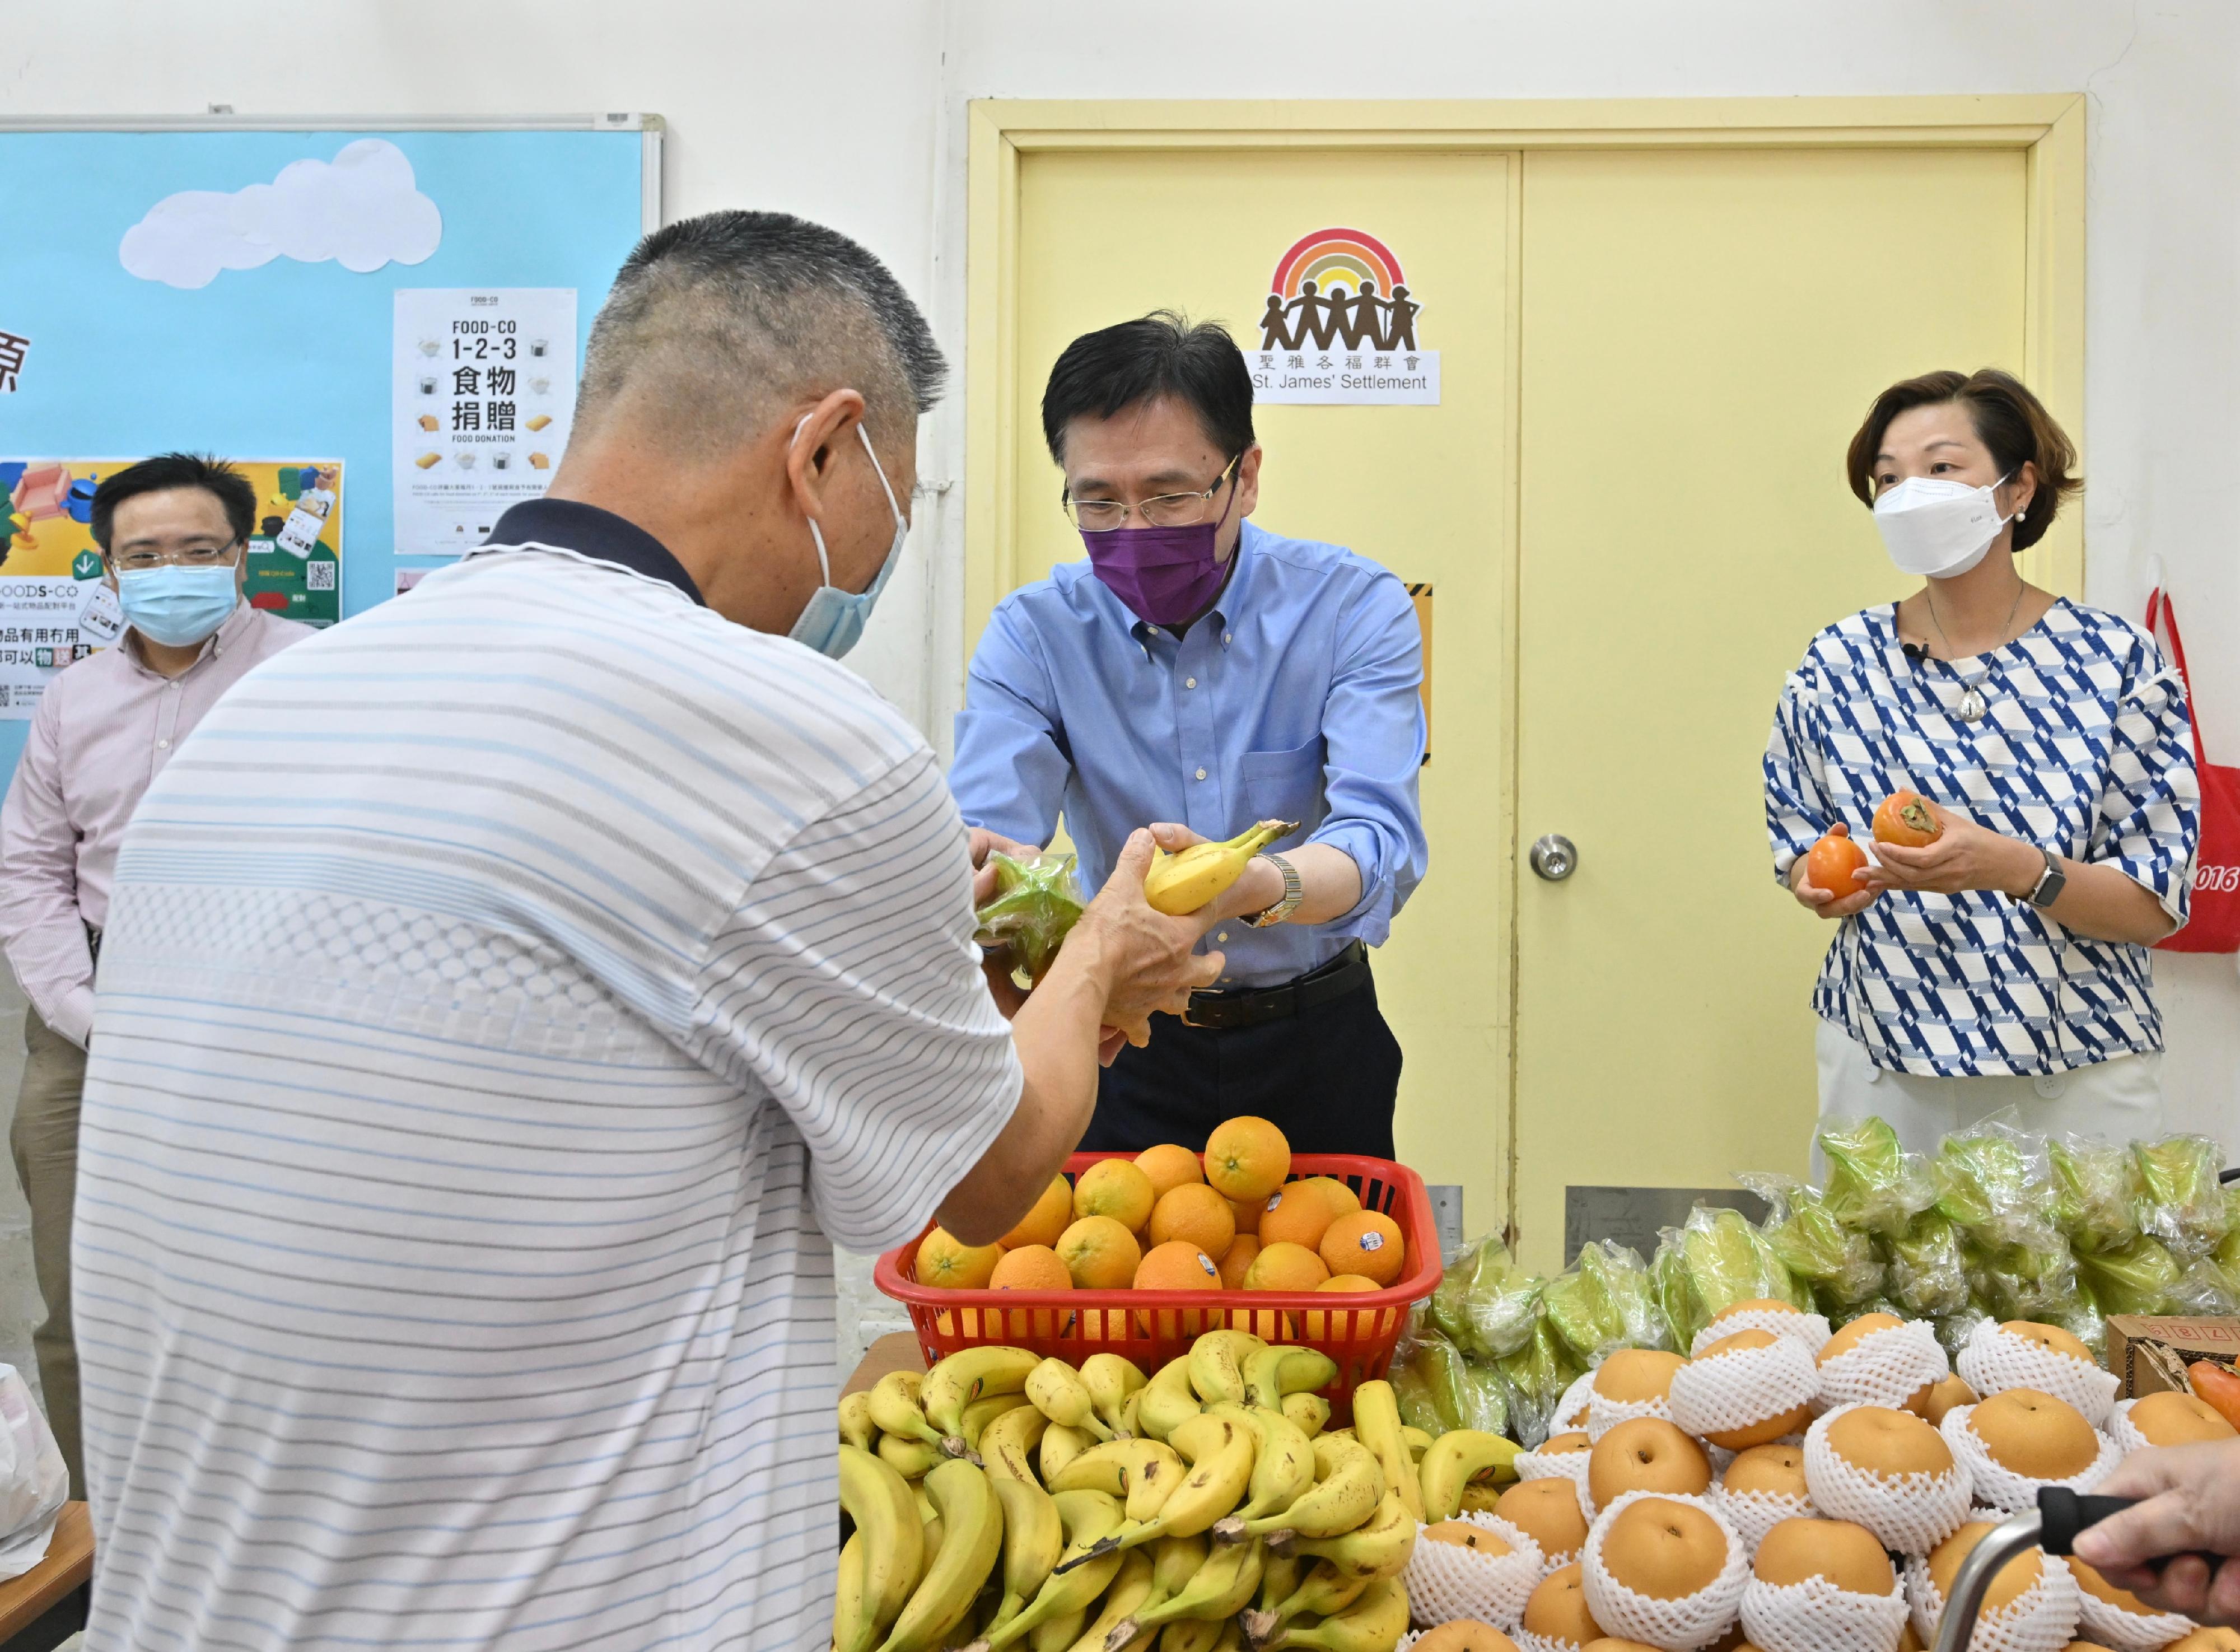 The Secretary for Innovation, Technology and Industry, Professor Sun Dong (second right), today (September 9) distributes fruit to grassroots families at the Kindness Centre of St James' Settlement to extend his warm regards on the day before the Mid-Autumn Festival.